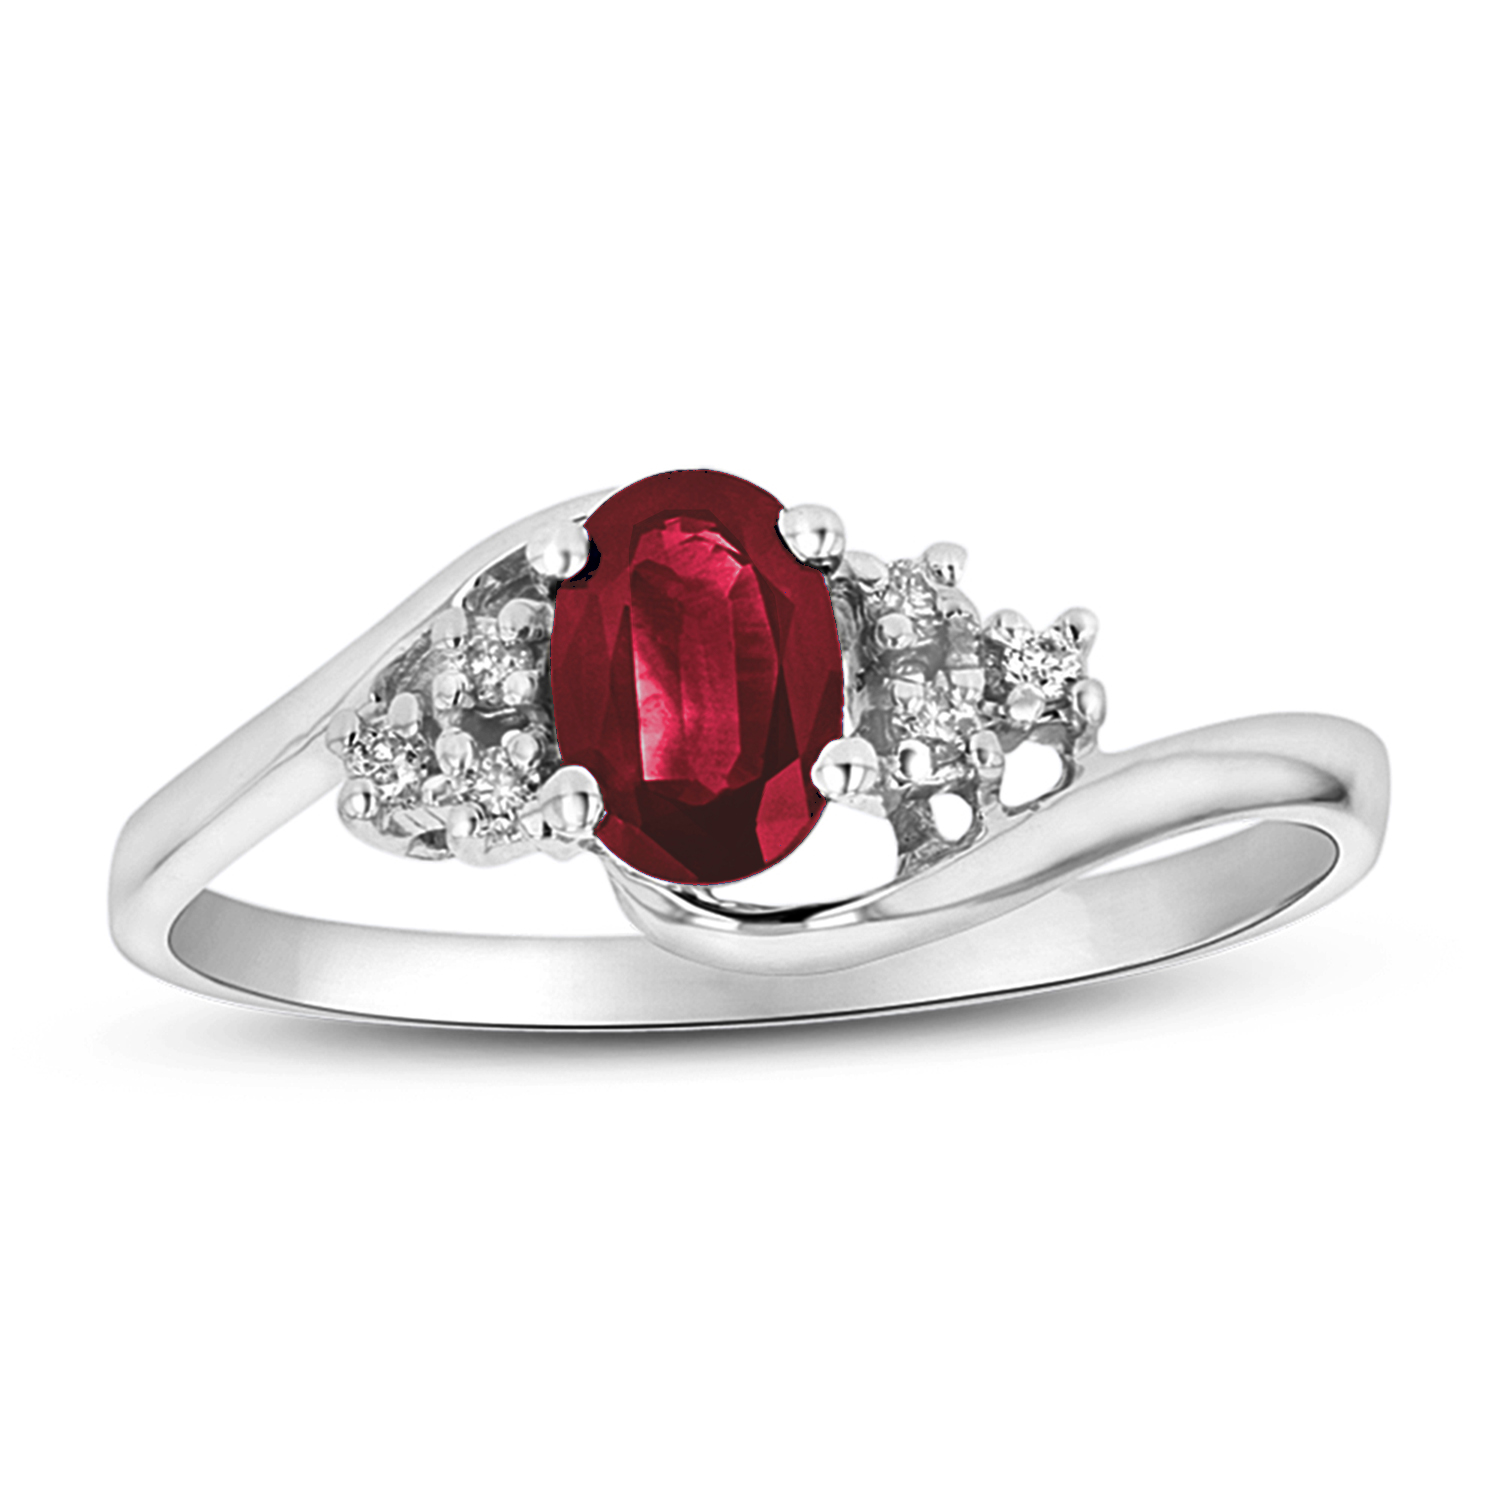 View 0.46cttw Natural Heated Ruby and Diamond Fashion Ring set in 14k Gold